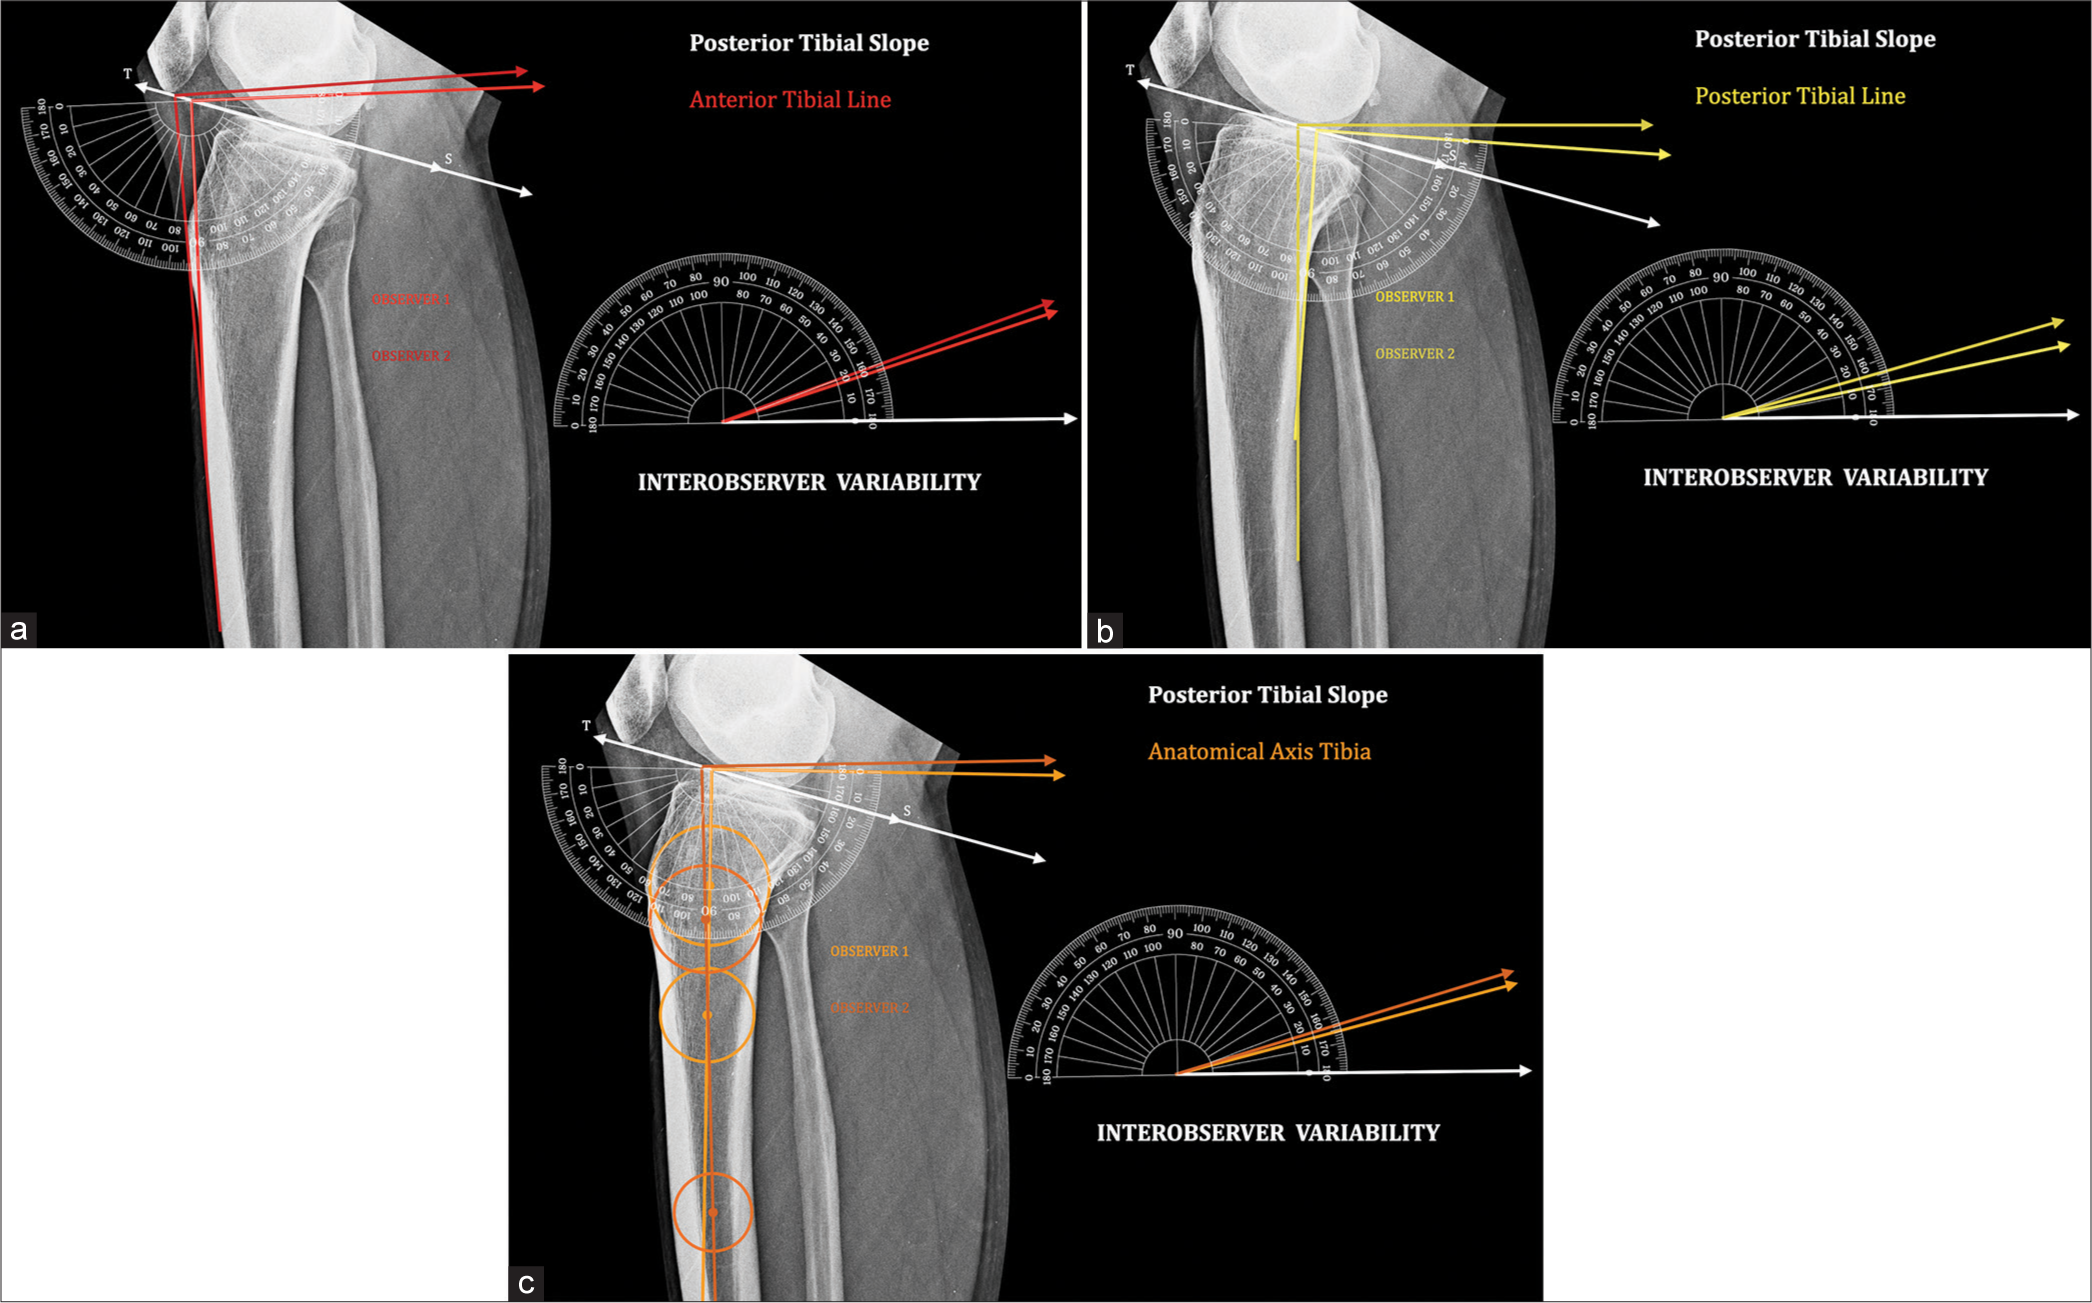 Interobserver variability: Tibial slope (TS) line – Line joining the anterior and posterior edge of tibial plateau. Posterior tibial slope measured by two observers shows a significant difference and therefore erroneous. (a) Anterior tibial line. : Observer 1, : Observer 2. (b) Posterior tibial line. : Observer 1, : Observer 2. (c) Anatomical axis tibia. : Observer 1, : Observer 2.